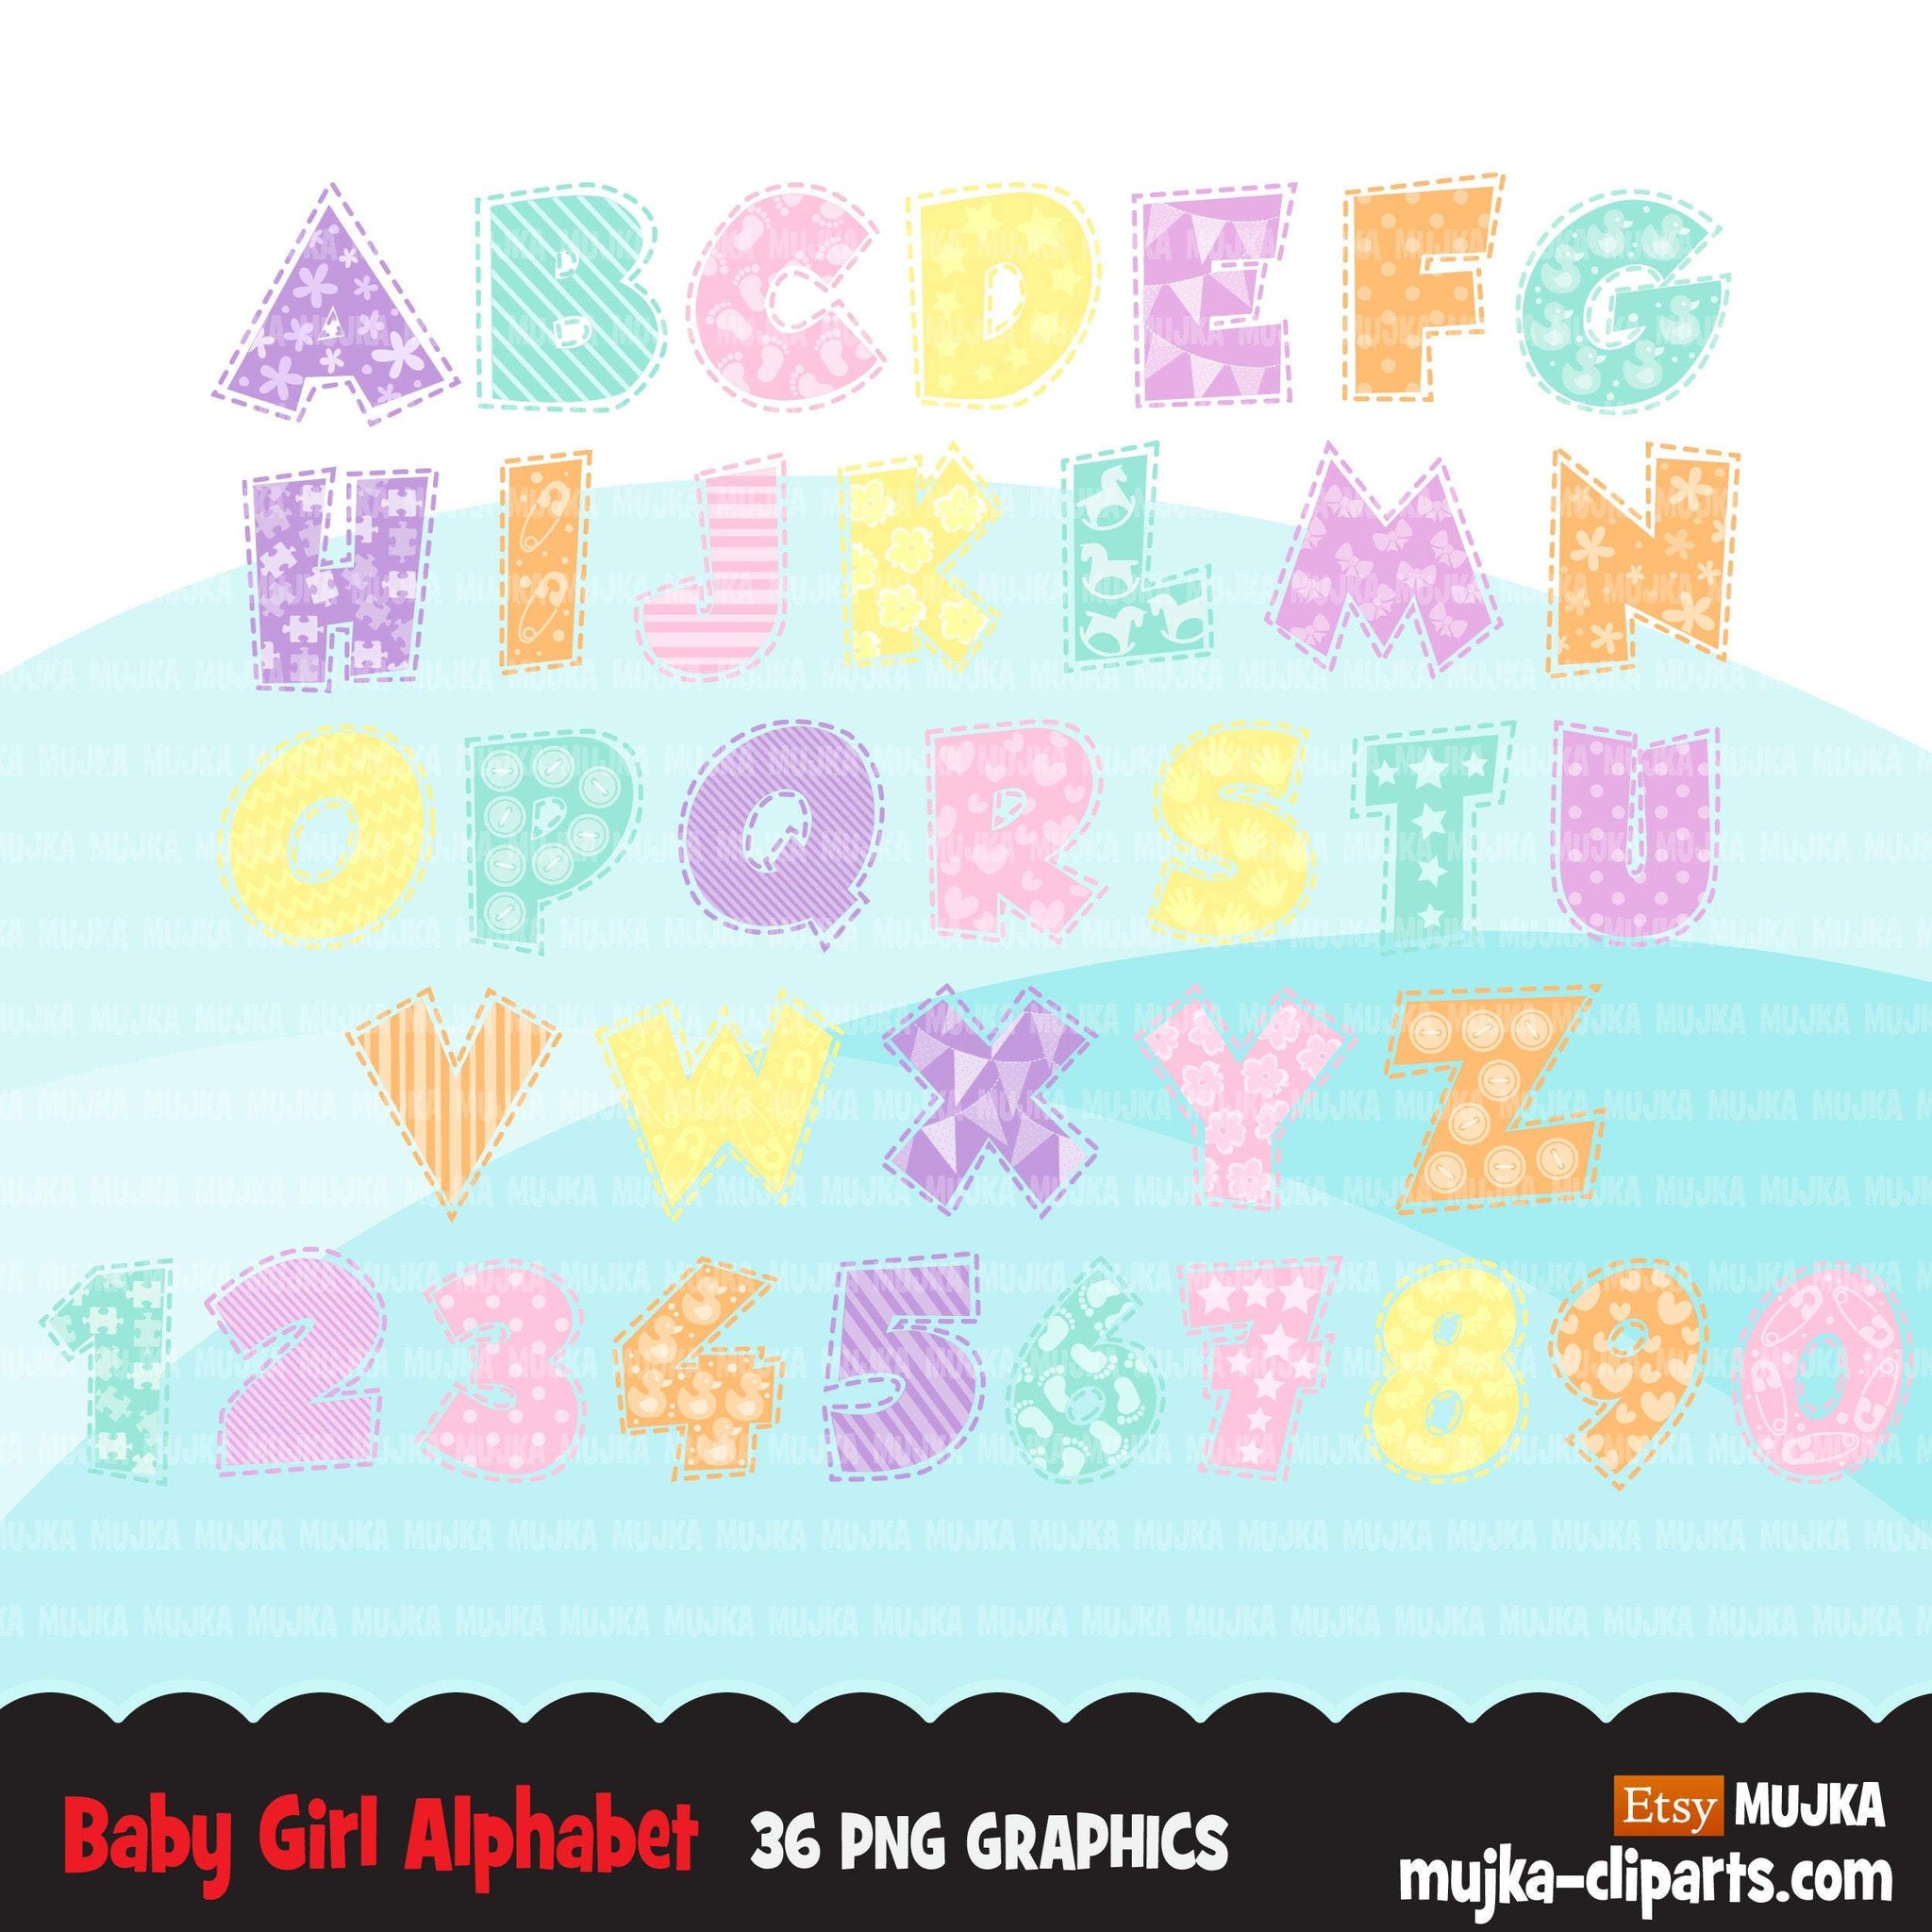 Baby Girl Alphabet Clipart, stitched lines, stackable, girl birthday, baby shower letters and numbers, PNG graphics